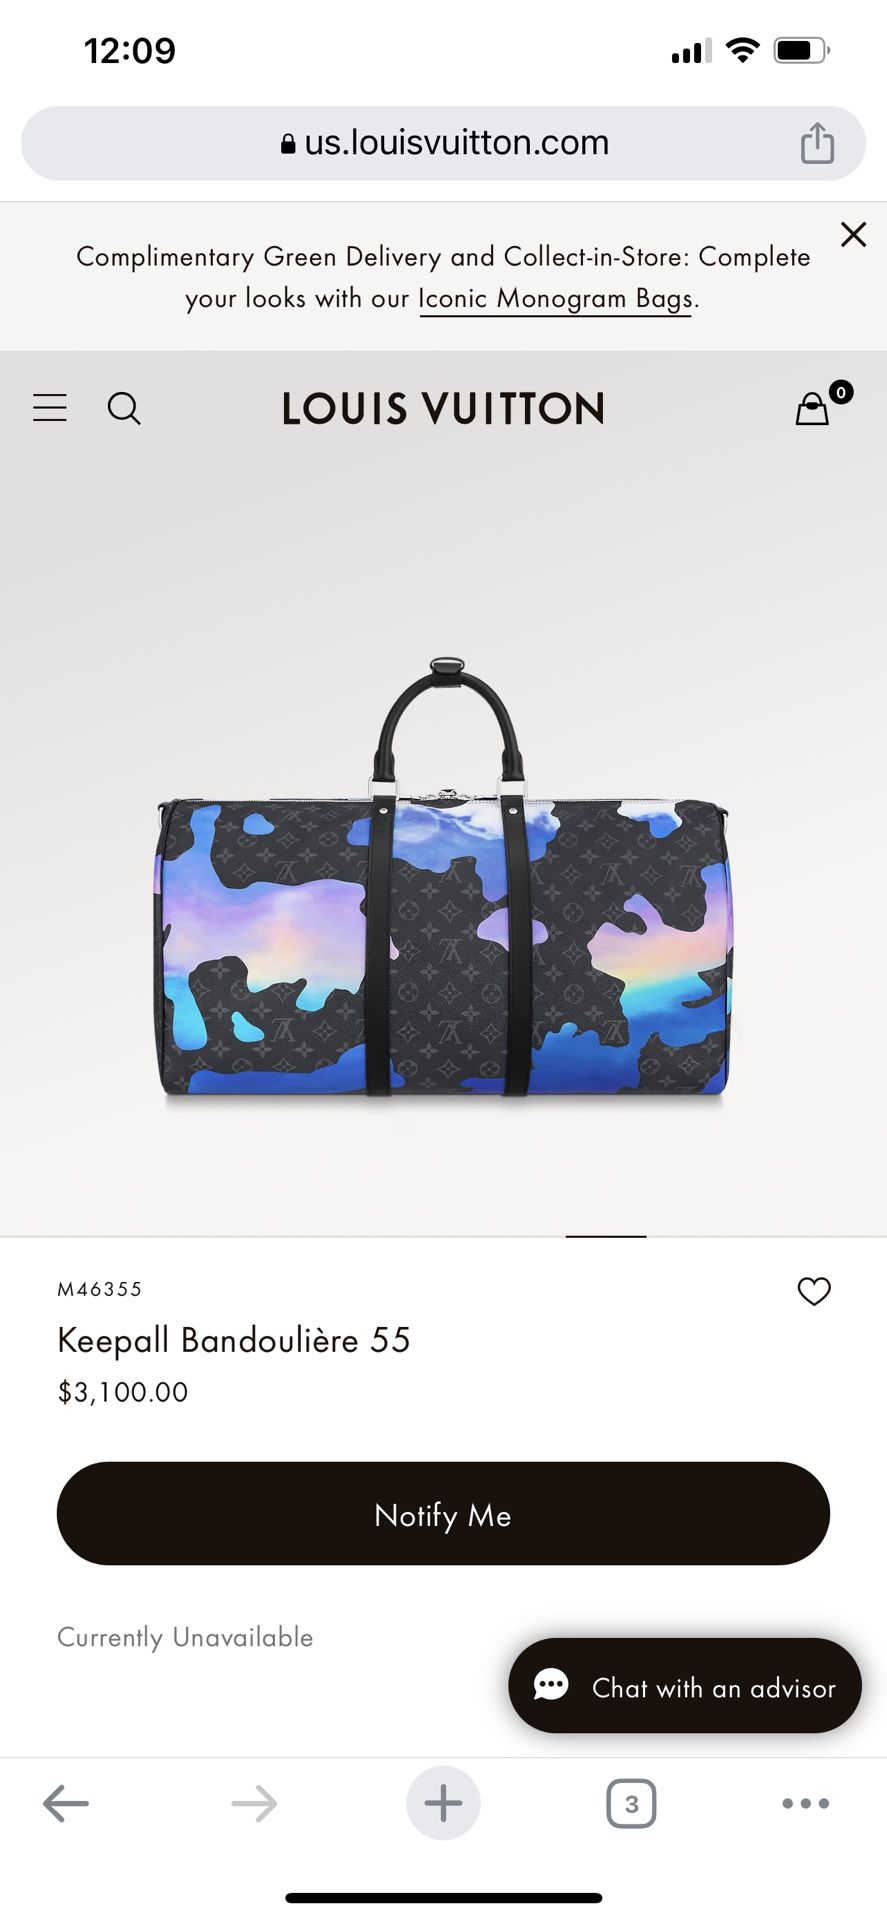 authentic louis vuitton keepall 60 for Sale in Safety Harbor, FL - OfferUp